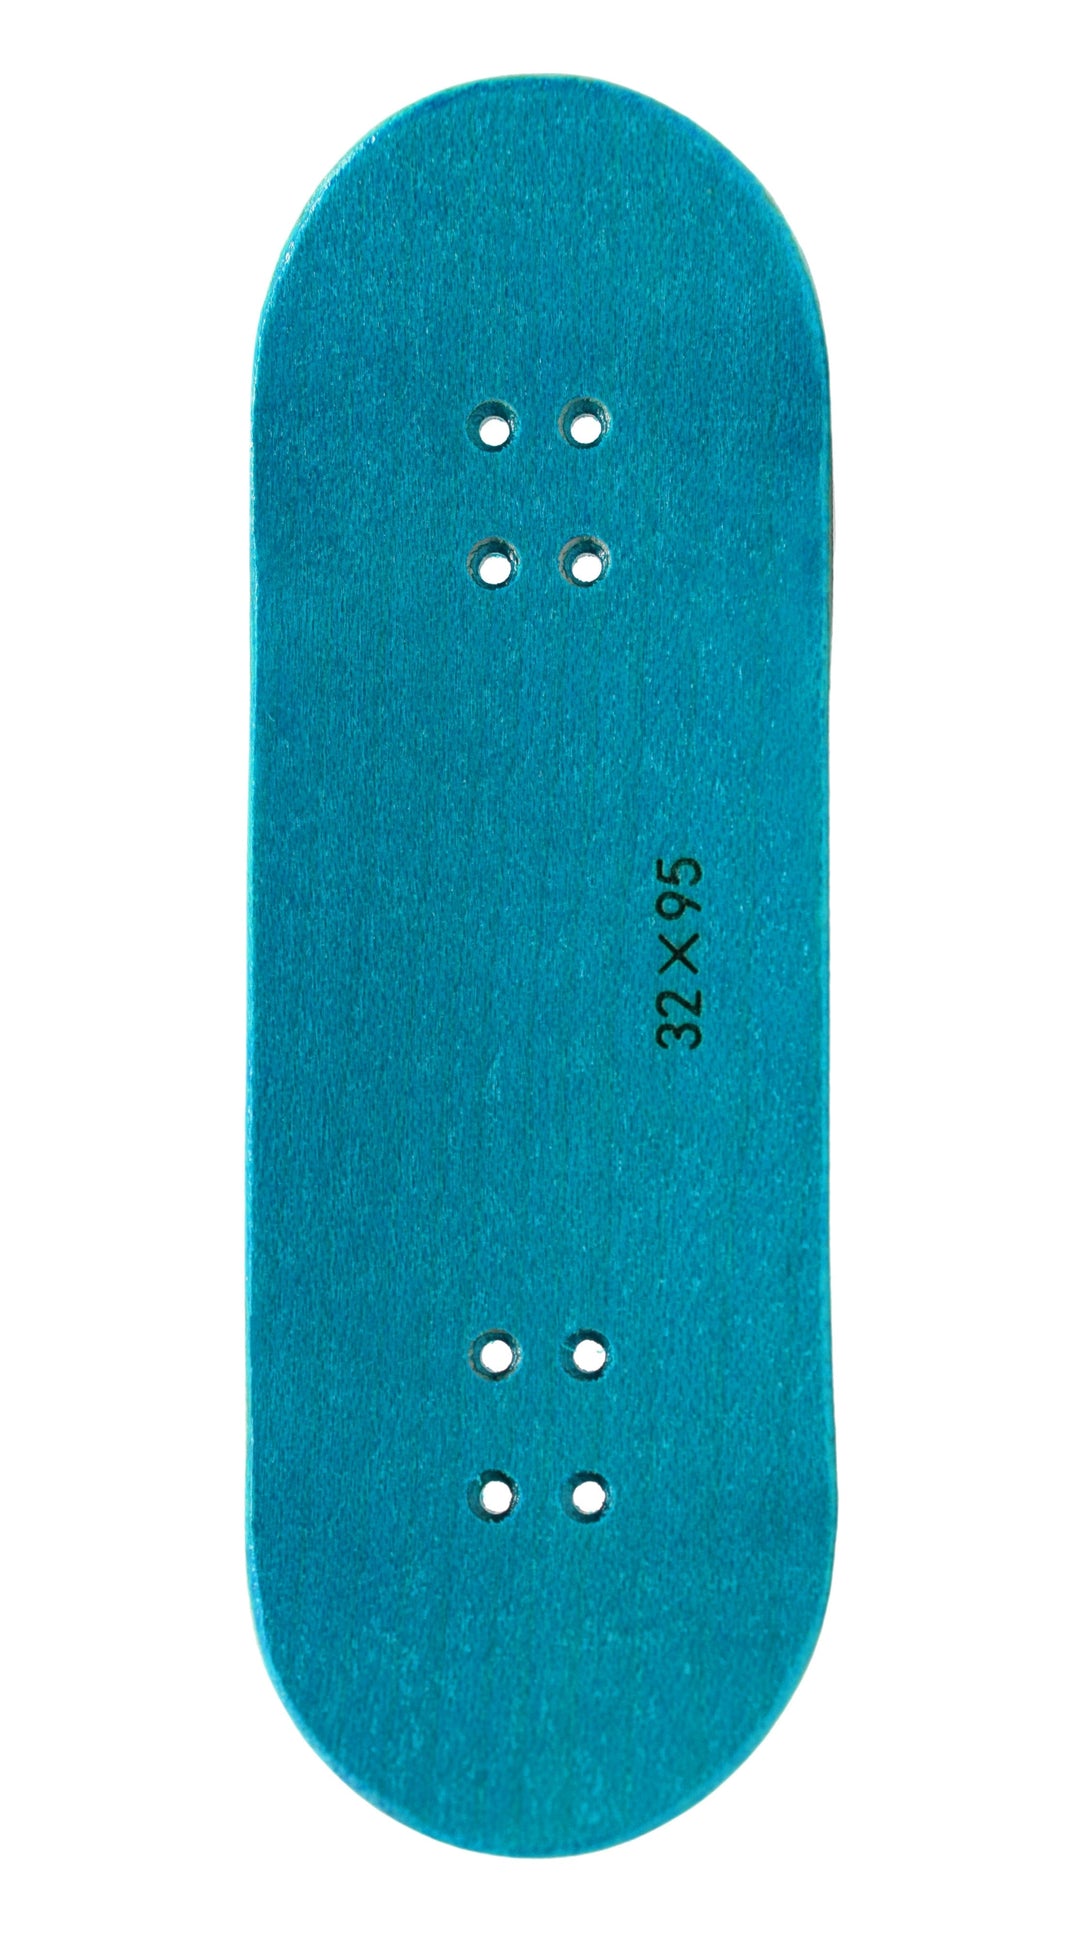 Teak Tuning PROlific Wooden 5 Ply Fingerboard Deck 32x95mm - Teak Teal - with Color Matching Mid Ply